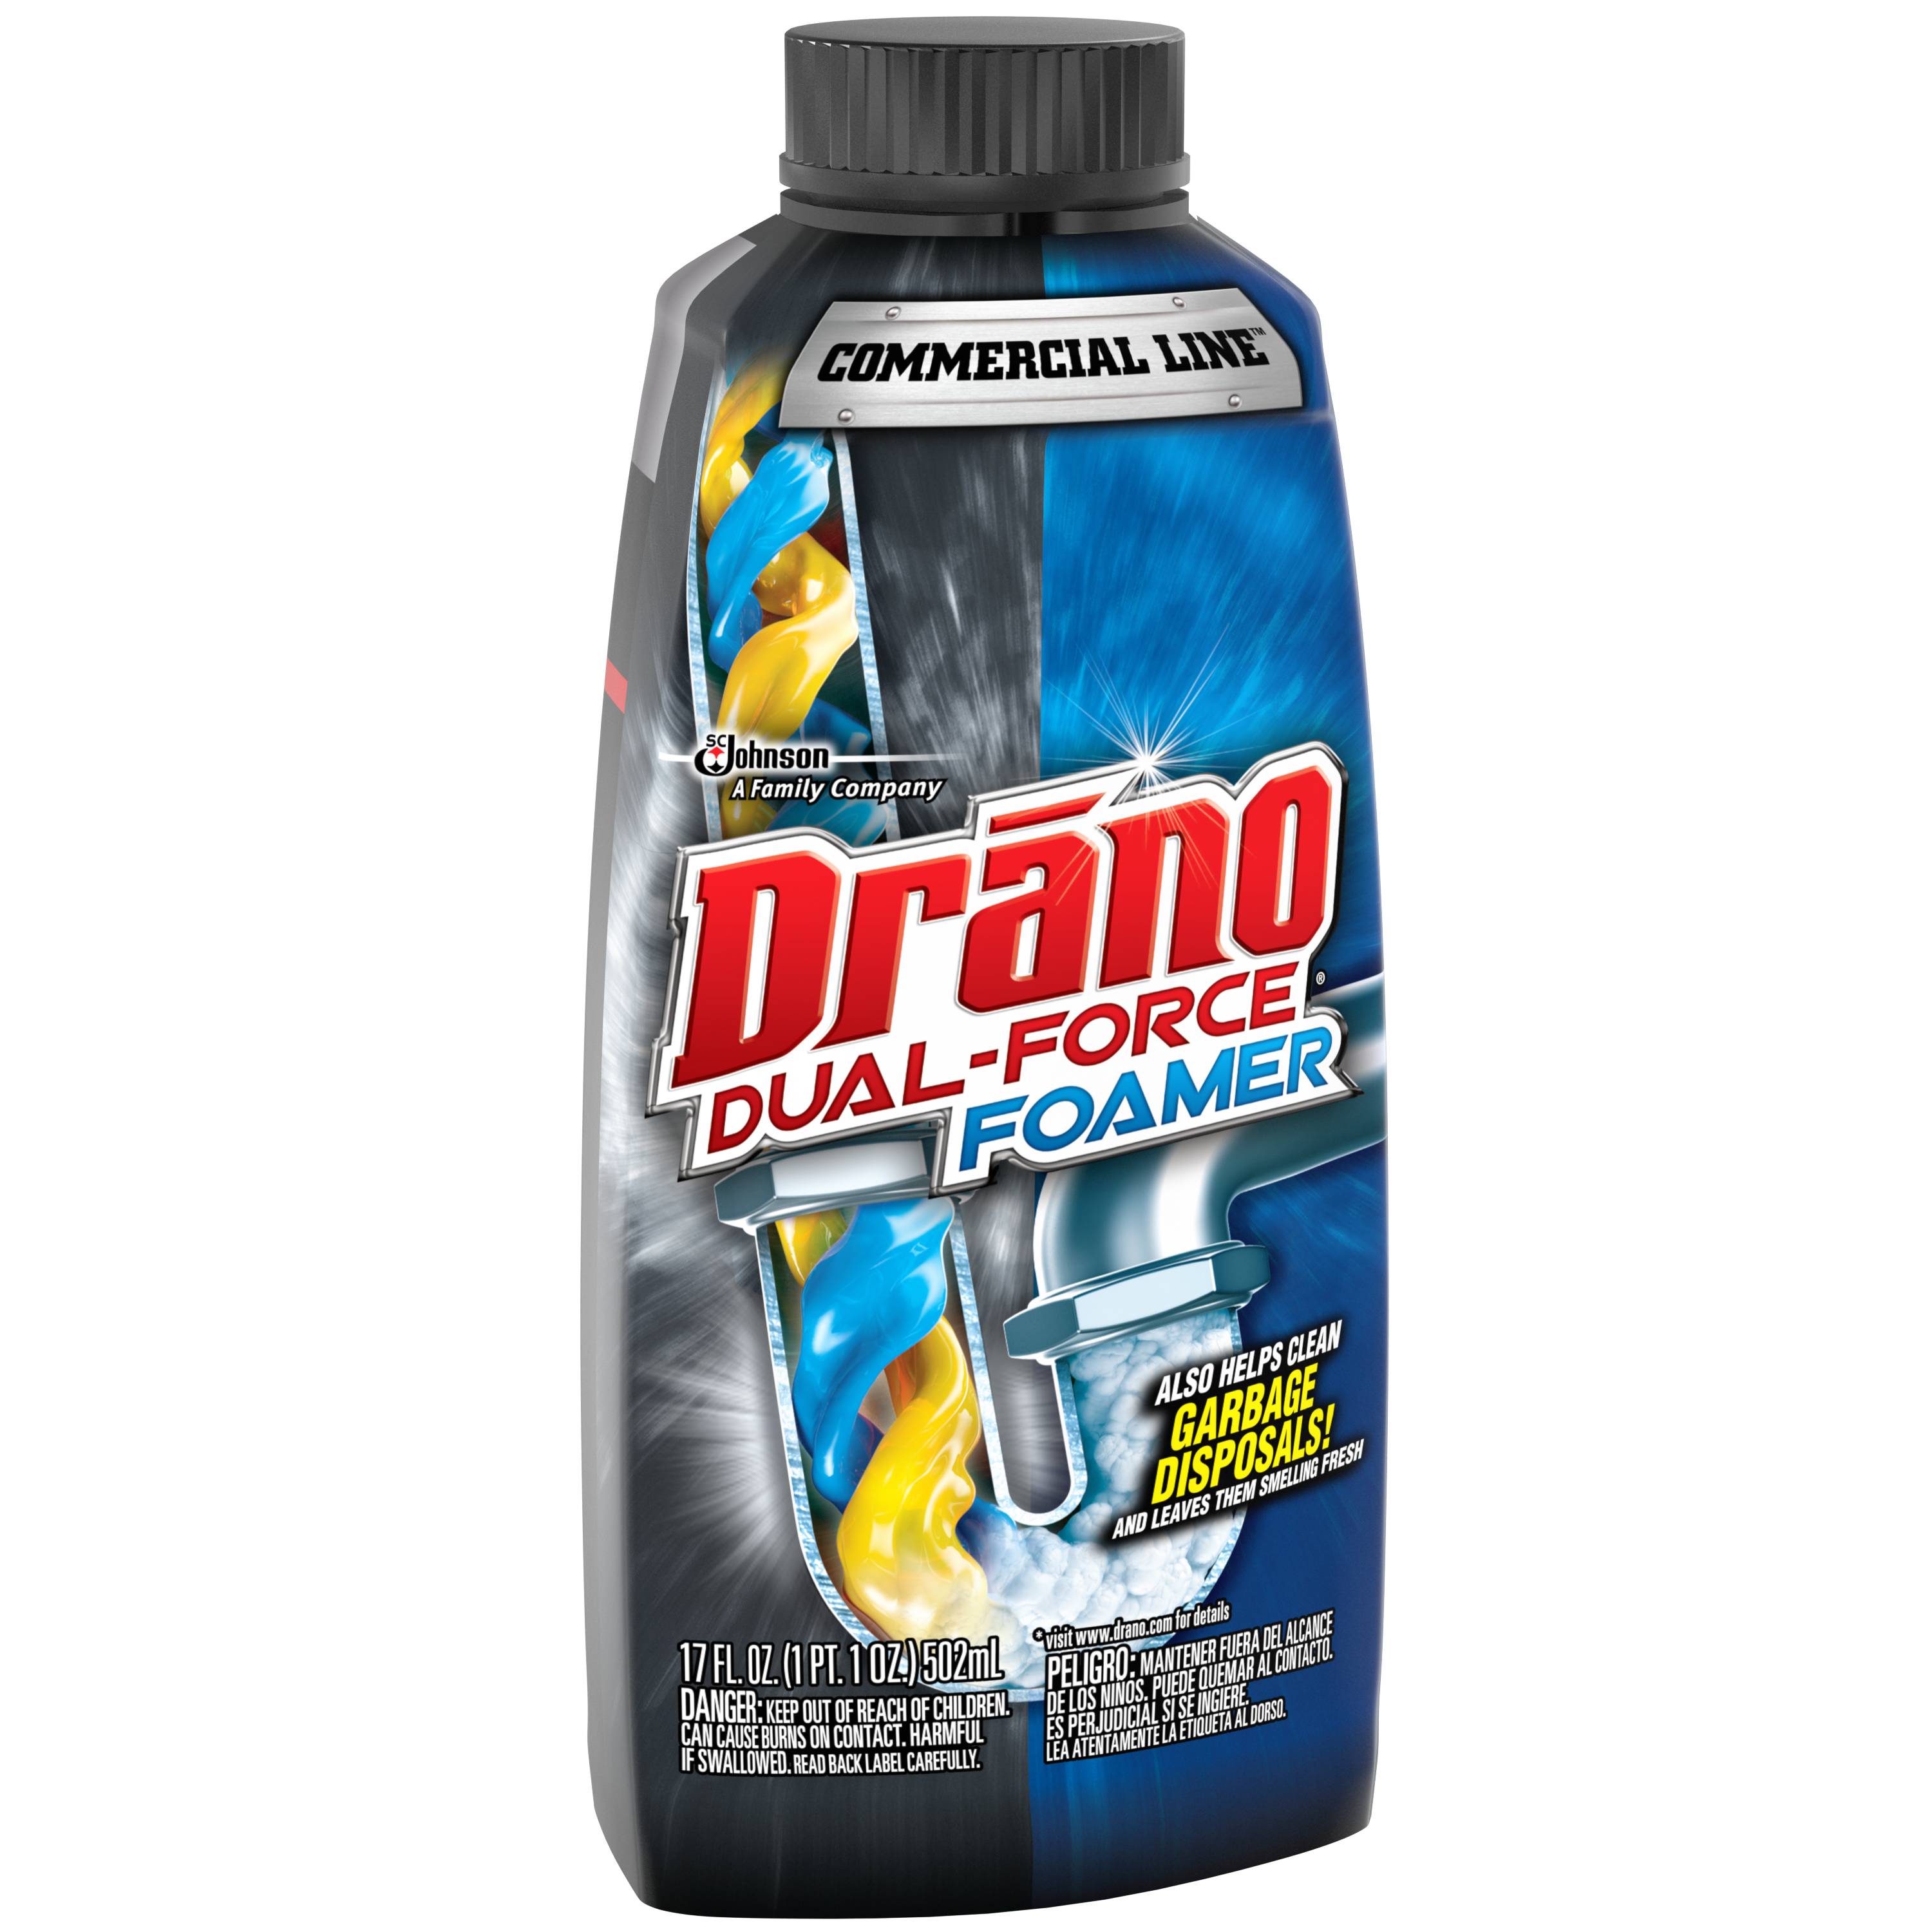 Drano Max Build-Up Remover Commercial Line 60-fl oz Drain Cleaner